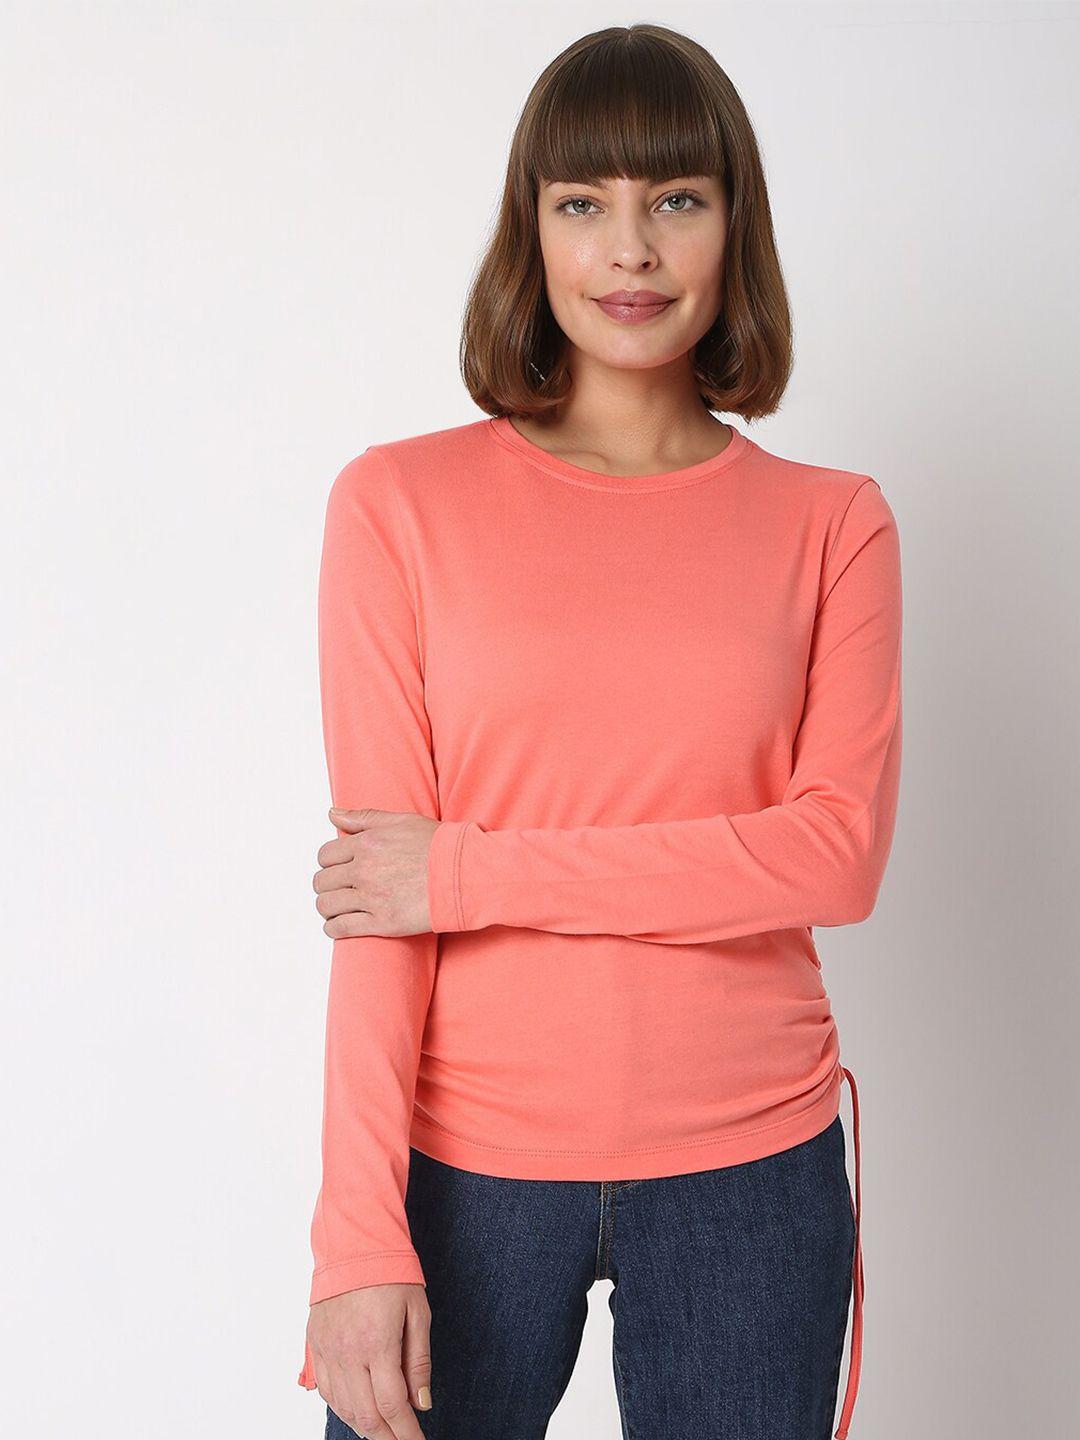 vero moda women coral full sleeves cotton t shirt with side string